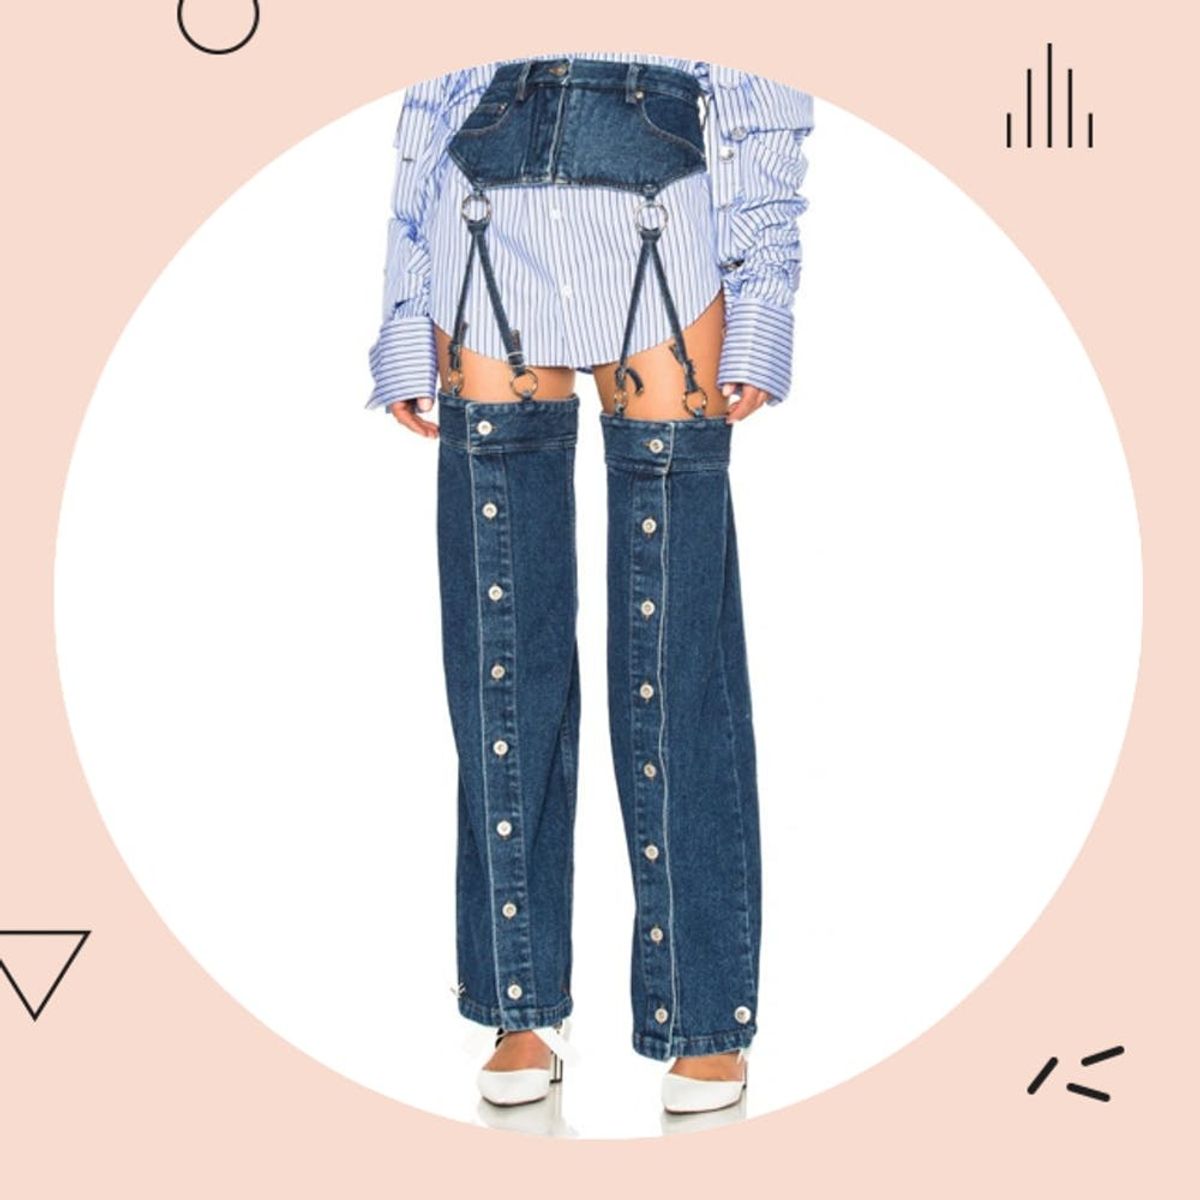 No, We Don’t Know How to Wear These $570 Garter-Belt Jeans Either